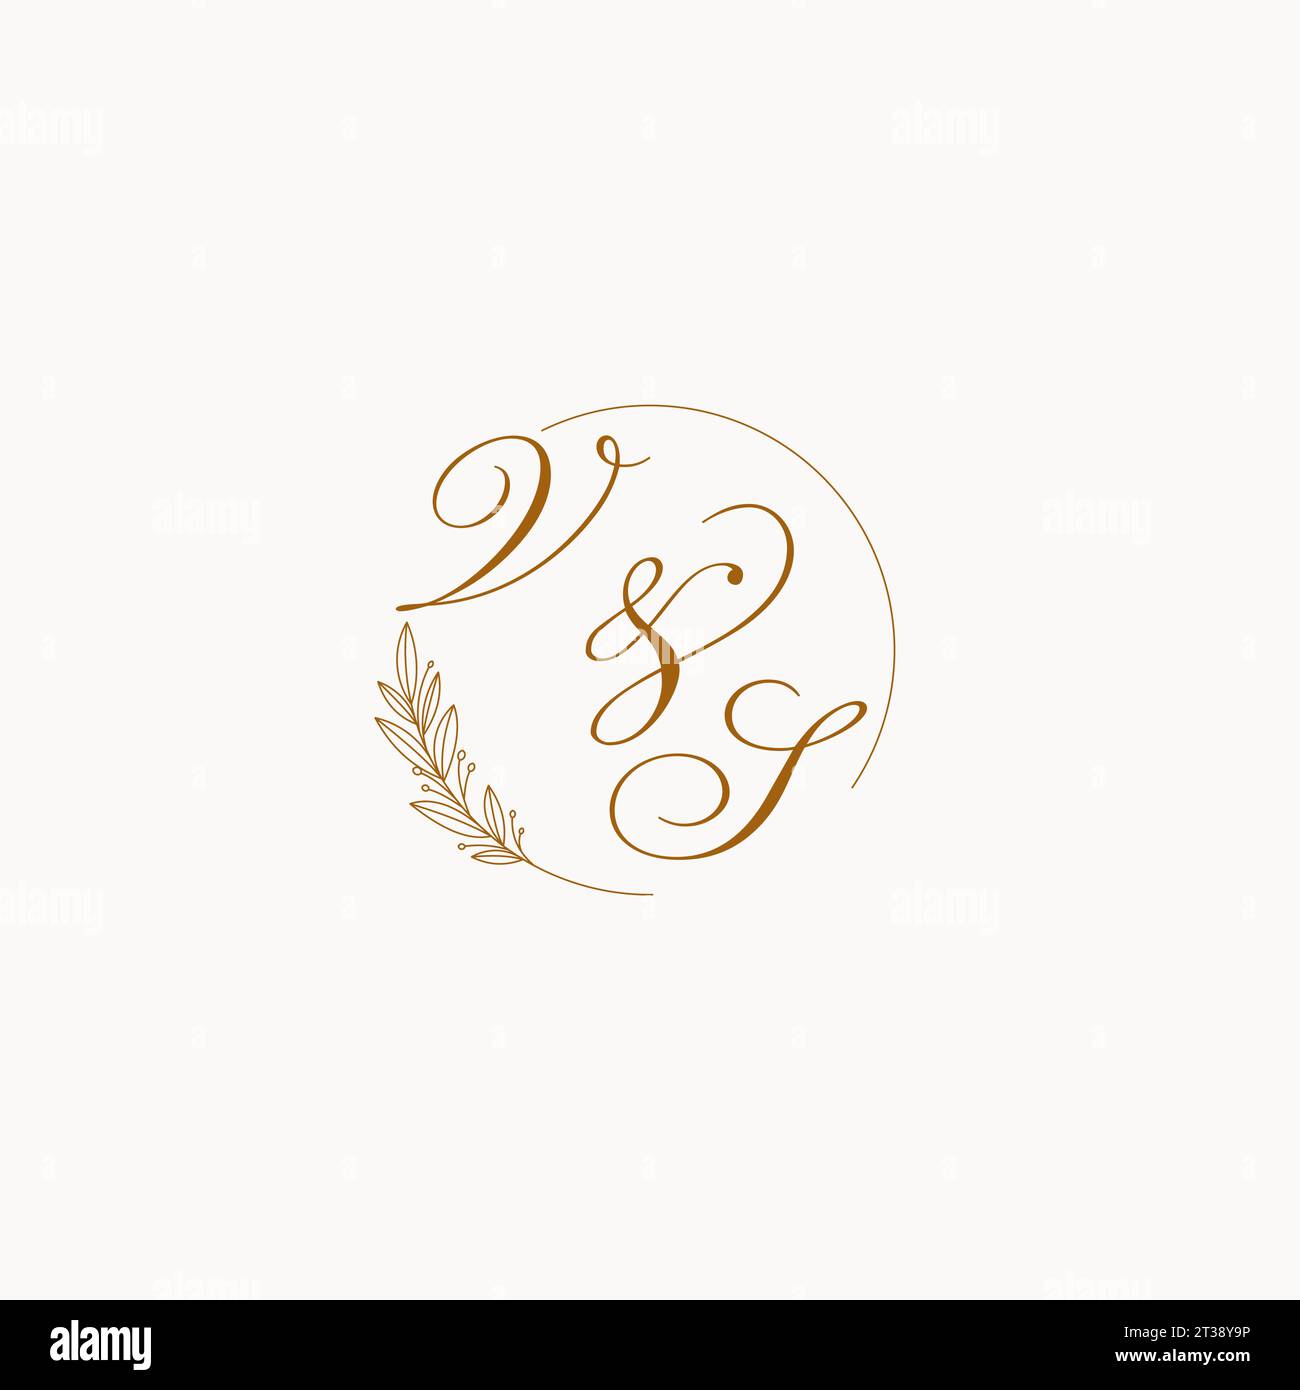 Initials VS wedding monogram logo with leaves and elegant circular lines vector graphic Stock Vector